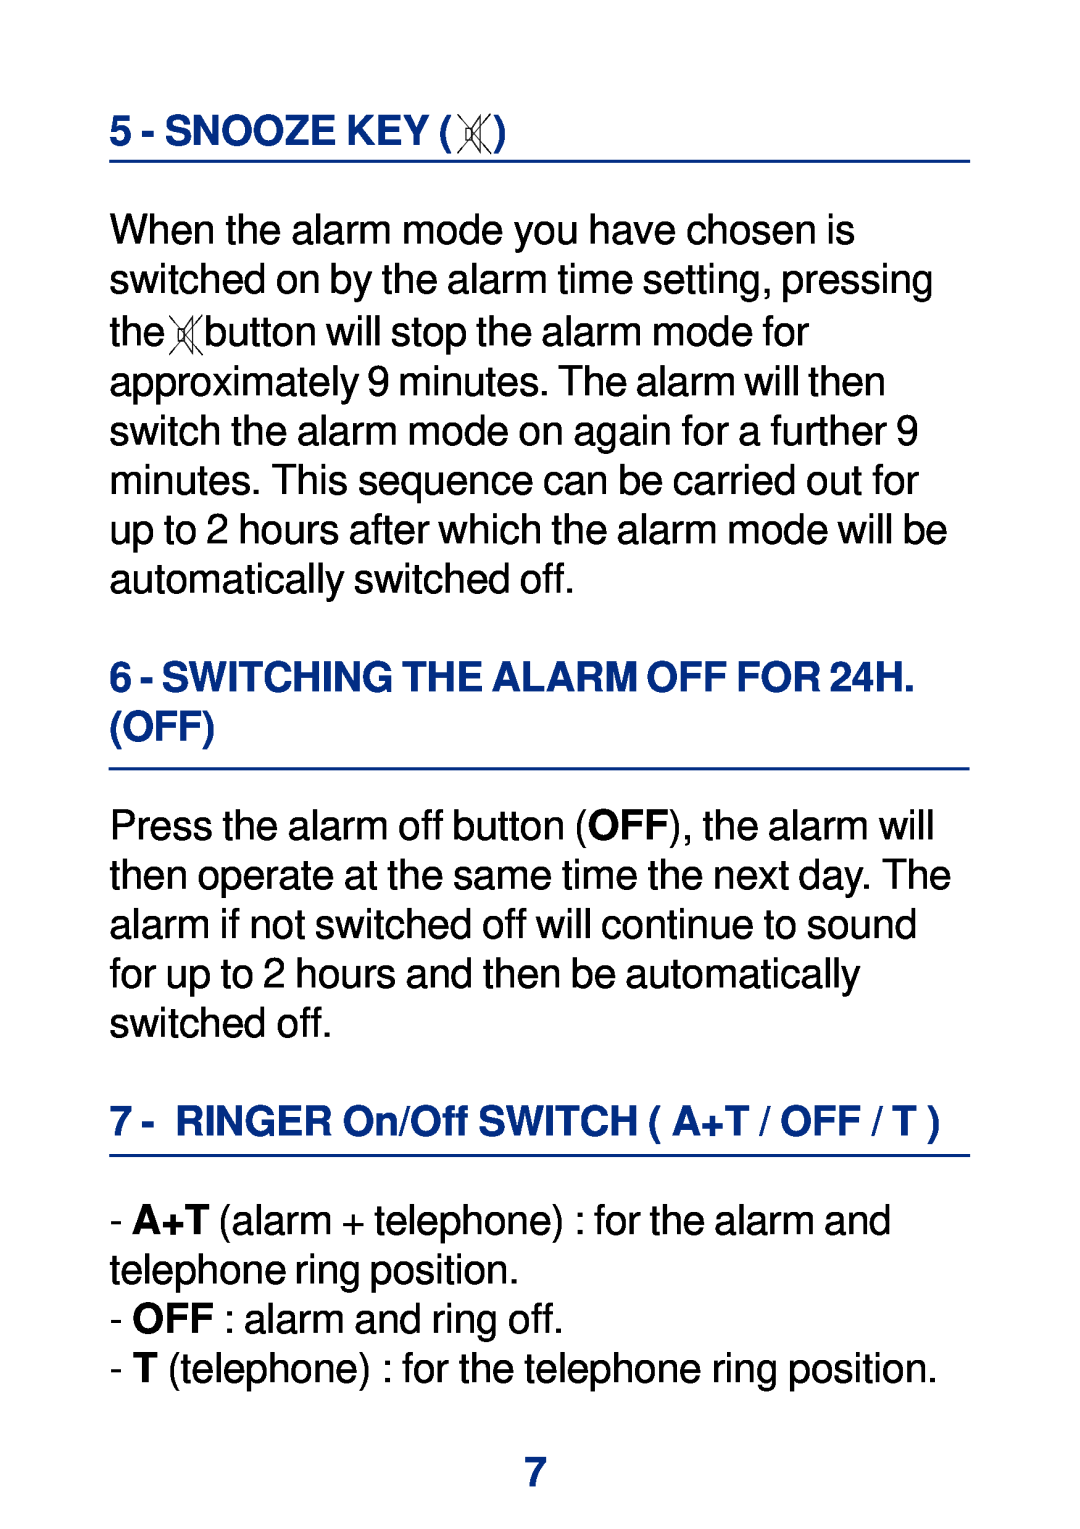 Geemarc Large Display Alarm Clock Snooze Key, SWITCHING THE ALARM OFF FOR 24H. OFF, RINGER On/Off SWITCH A+T / OFF / T 